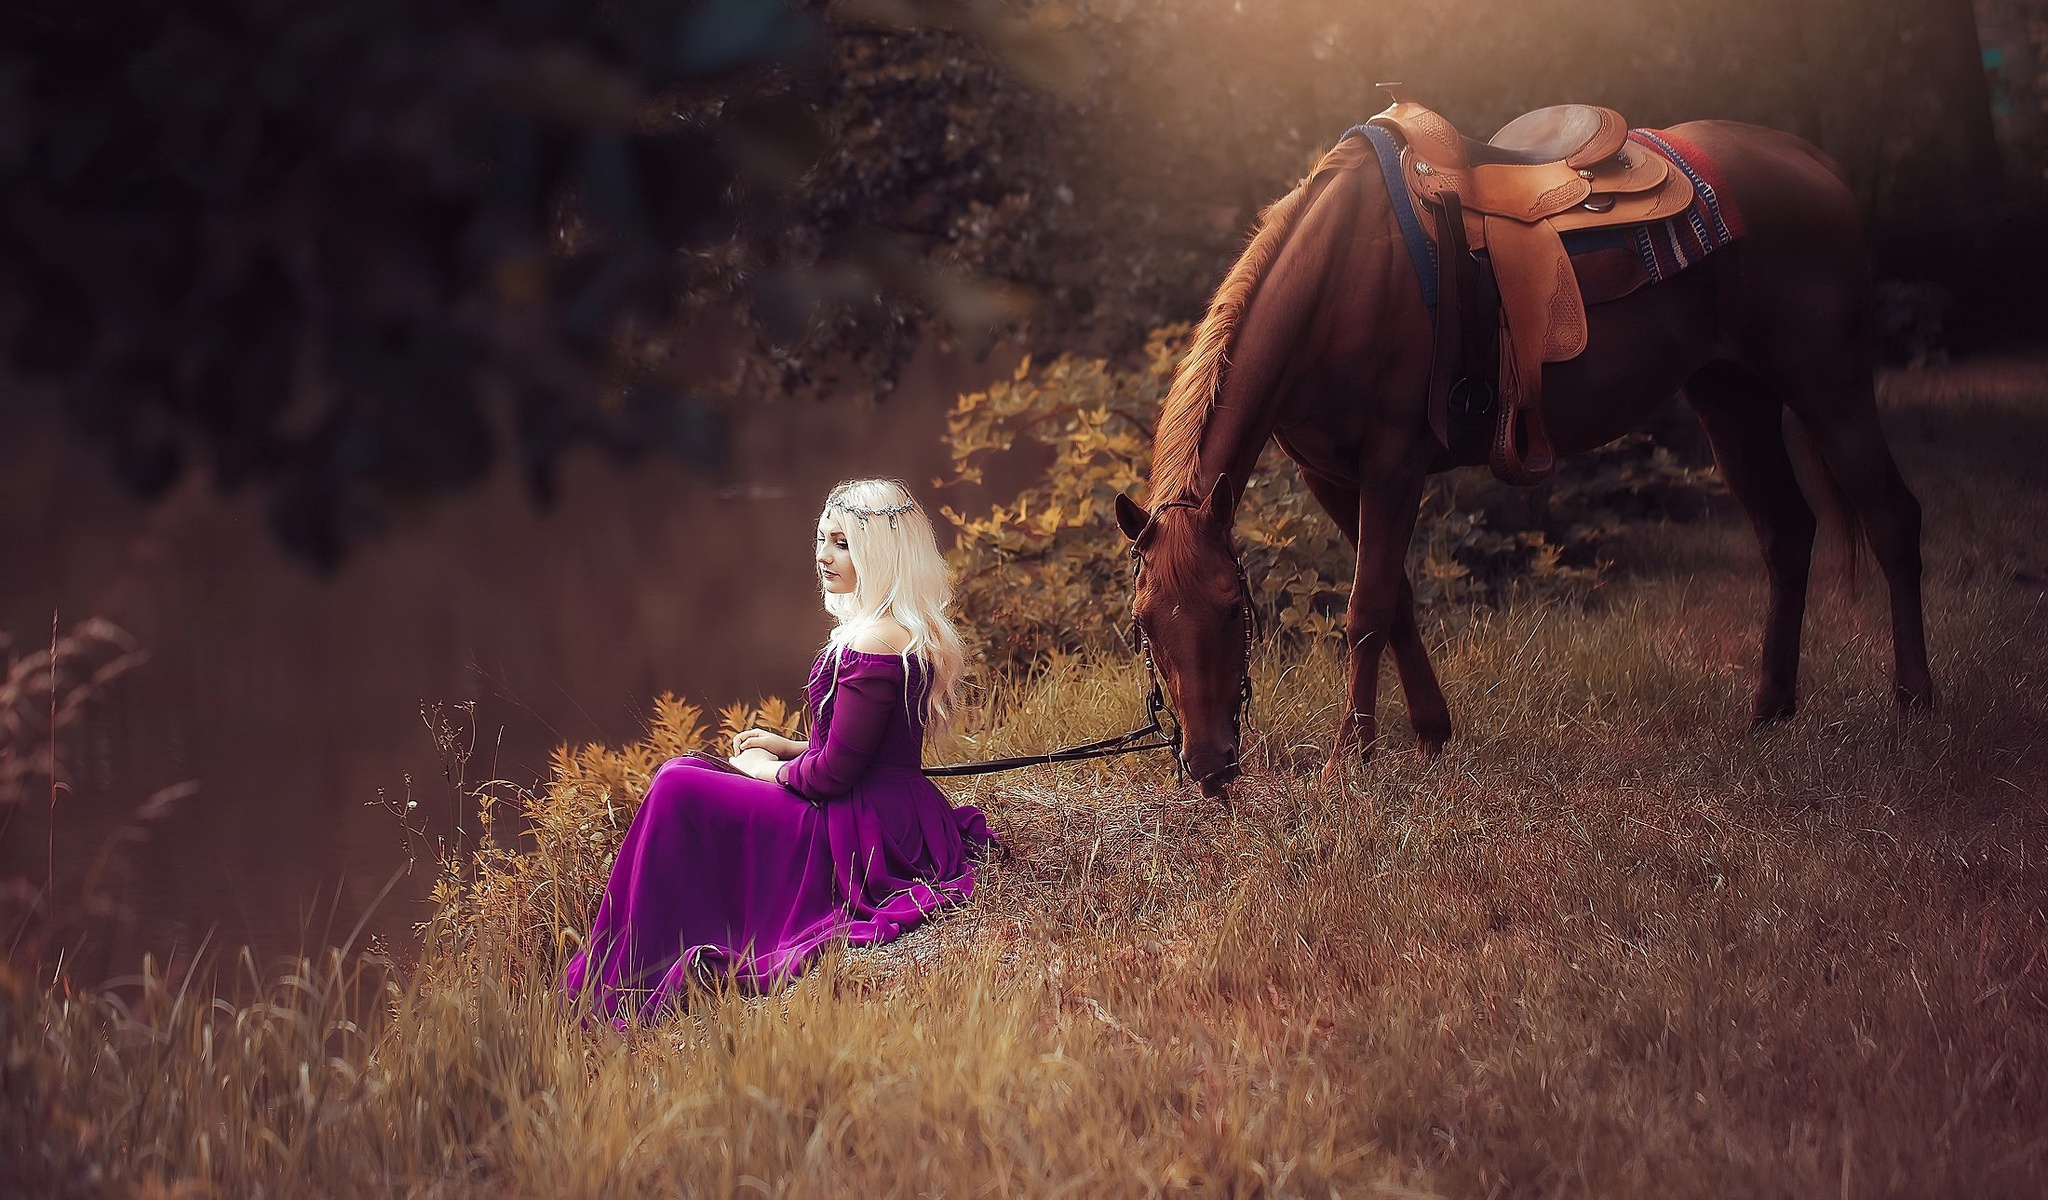 People 2048x1200 women fantasy girl nature horse animals women with horse violet dress